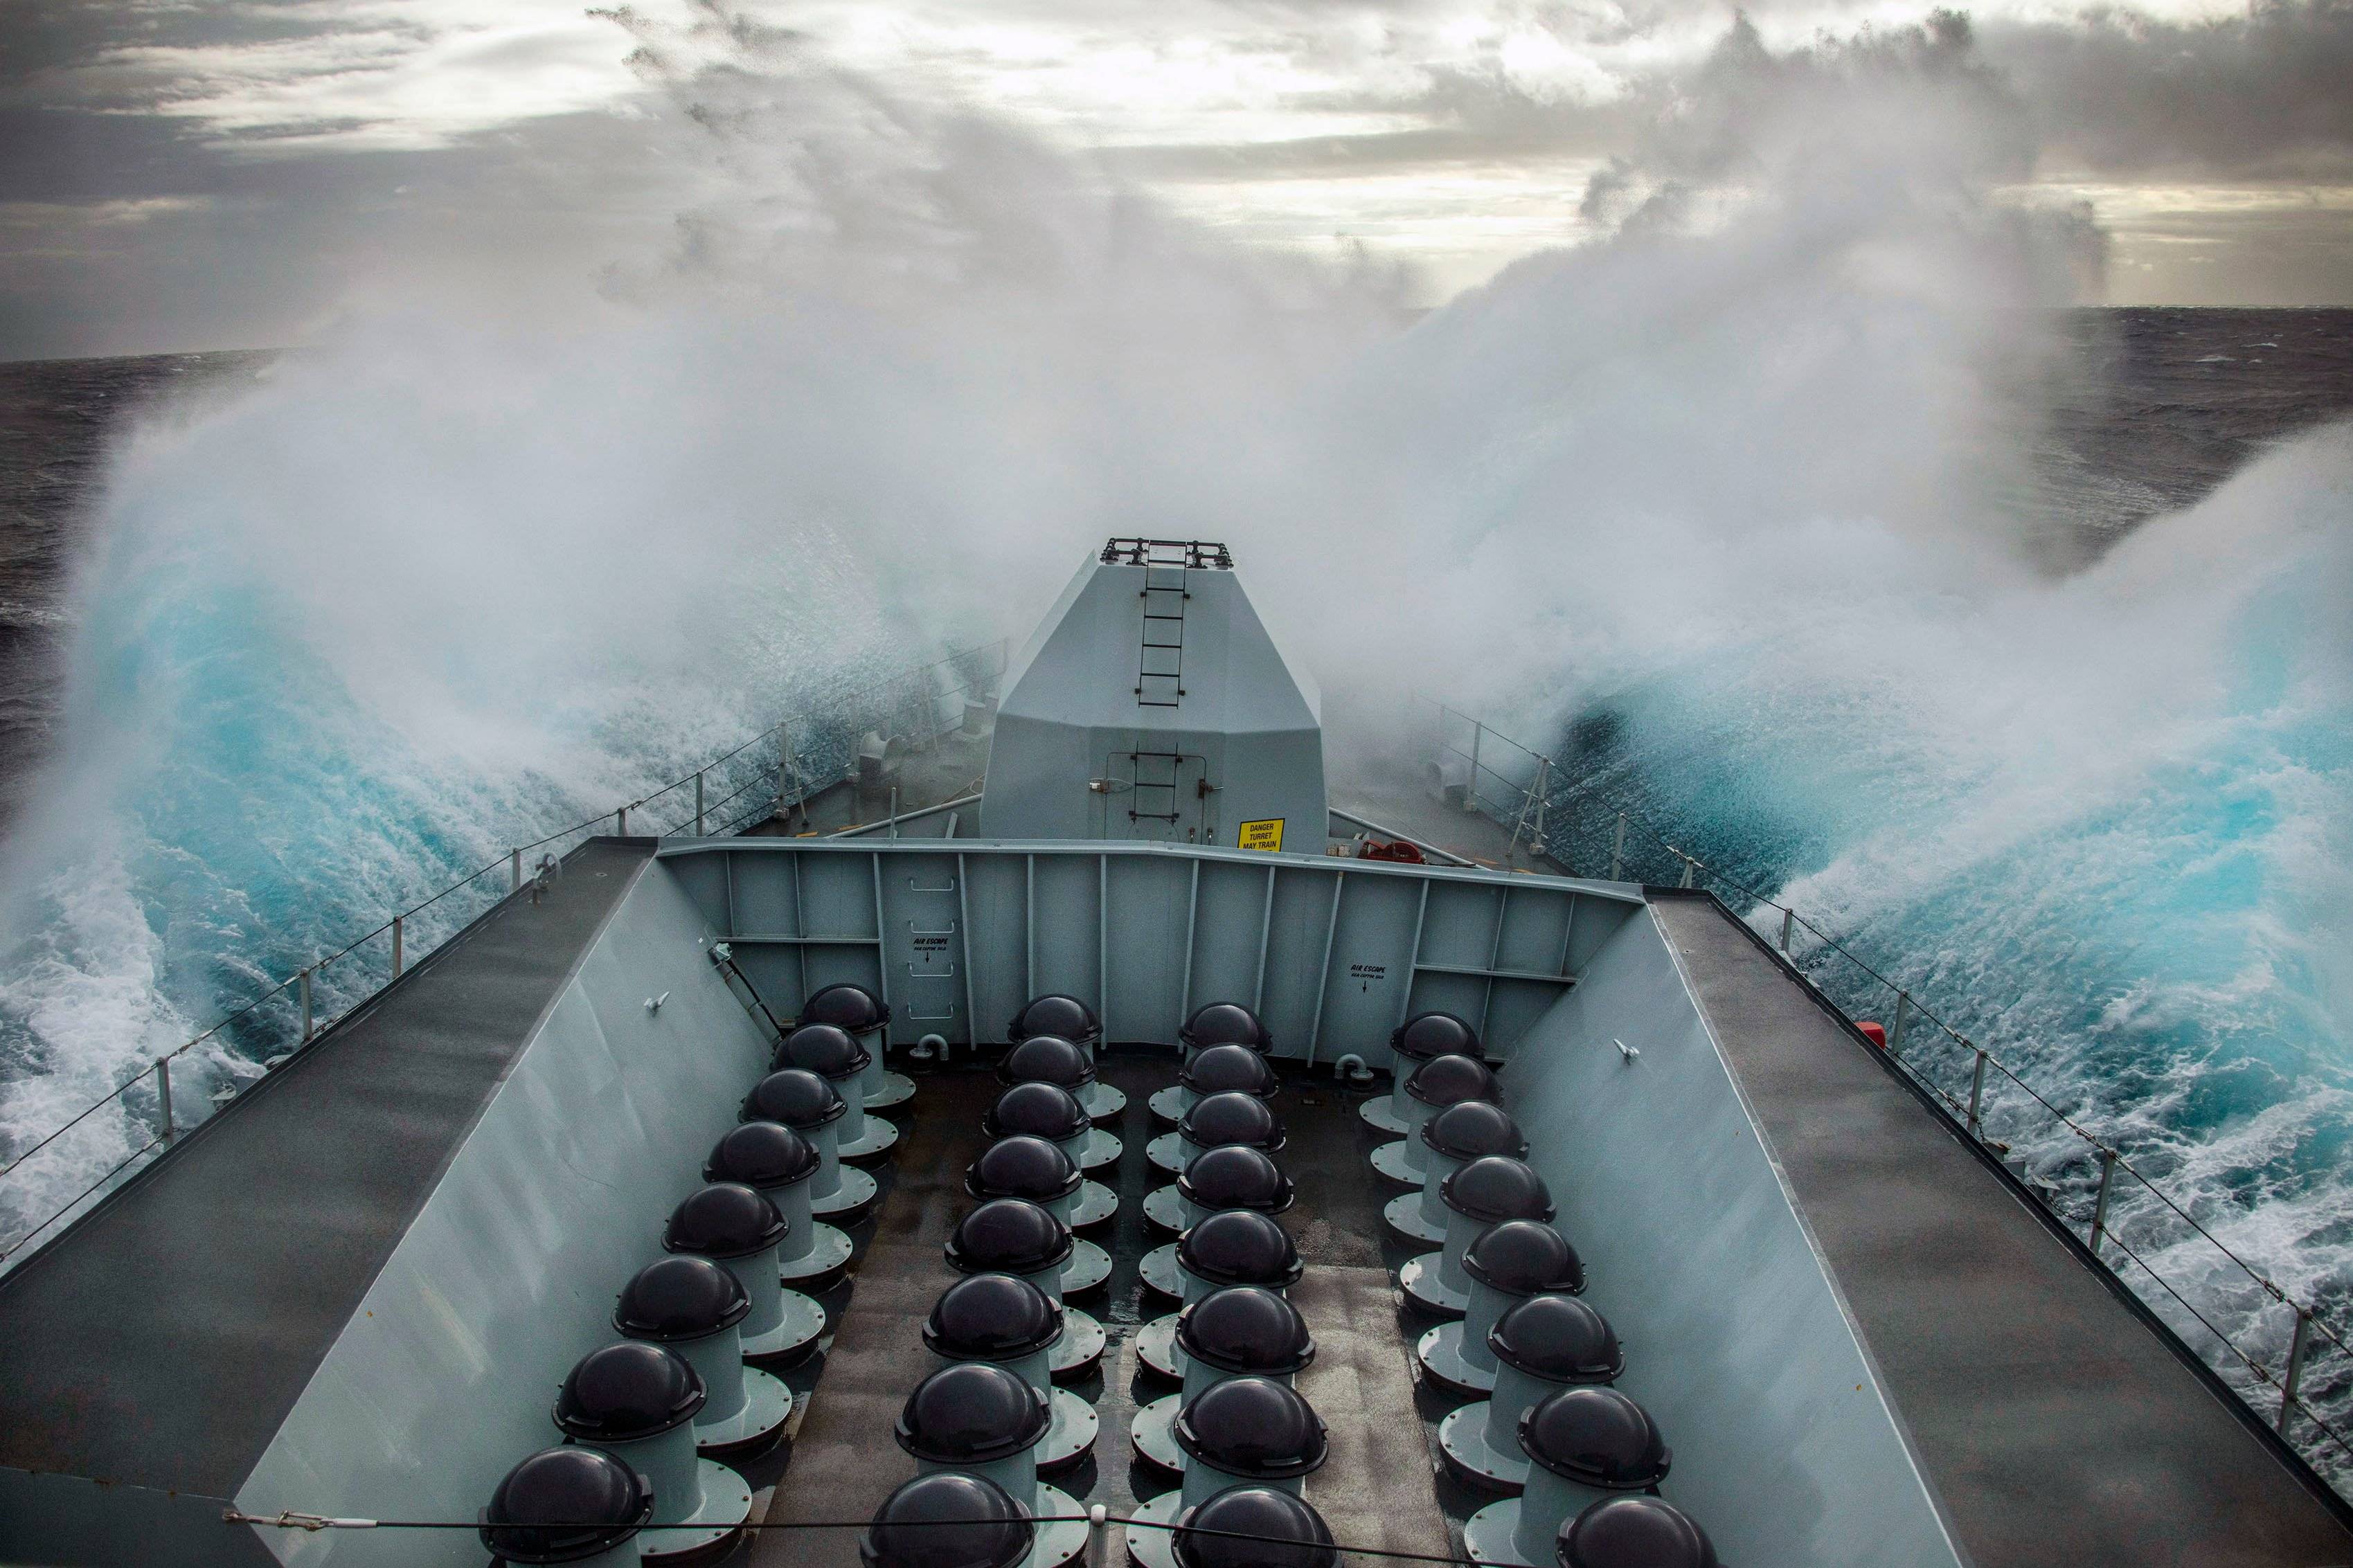 Pictured, Waves crash over HMS Lancaster's bow as she transits along Norway's coastline.

On 26th March 2021, HMS Lancaster started her transit south from Norway having been exercising with the Norwegian Frigate  THNoMS Thor Heyerdahl.

During the transit south down the the Norwegian coastline she encountered high seas which made for some impressive wave formations crashing over her bow.

The Type 23 Frigate from HMNB Portsmouth will conduct a short stint of maritime security patrols around the UK coastline before taking over duties as the Fleet Ready Escort Ship.

All the ships in the Type 23 class are named after Dukes, in this case, the Duke of Lancaster.

HMS Lancaster recently had a major refit and some of her new equipment includes a new Artisan 3D radar and vastly-improved air-defence capabilities provided by Sea Ceptor, replacing Sea Wolf missiles which only possess about half the Sea Ceptors range.

The hull was cleaned and coated with anti-fouling paint to prevent marine life attaching itself, the main 4.5in gun serviced, engines and machinery overhauled, new systems installed, and the bridge, messes and other communal areas revamped.